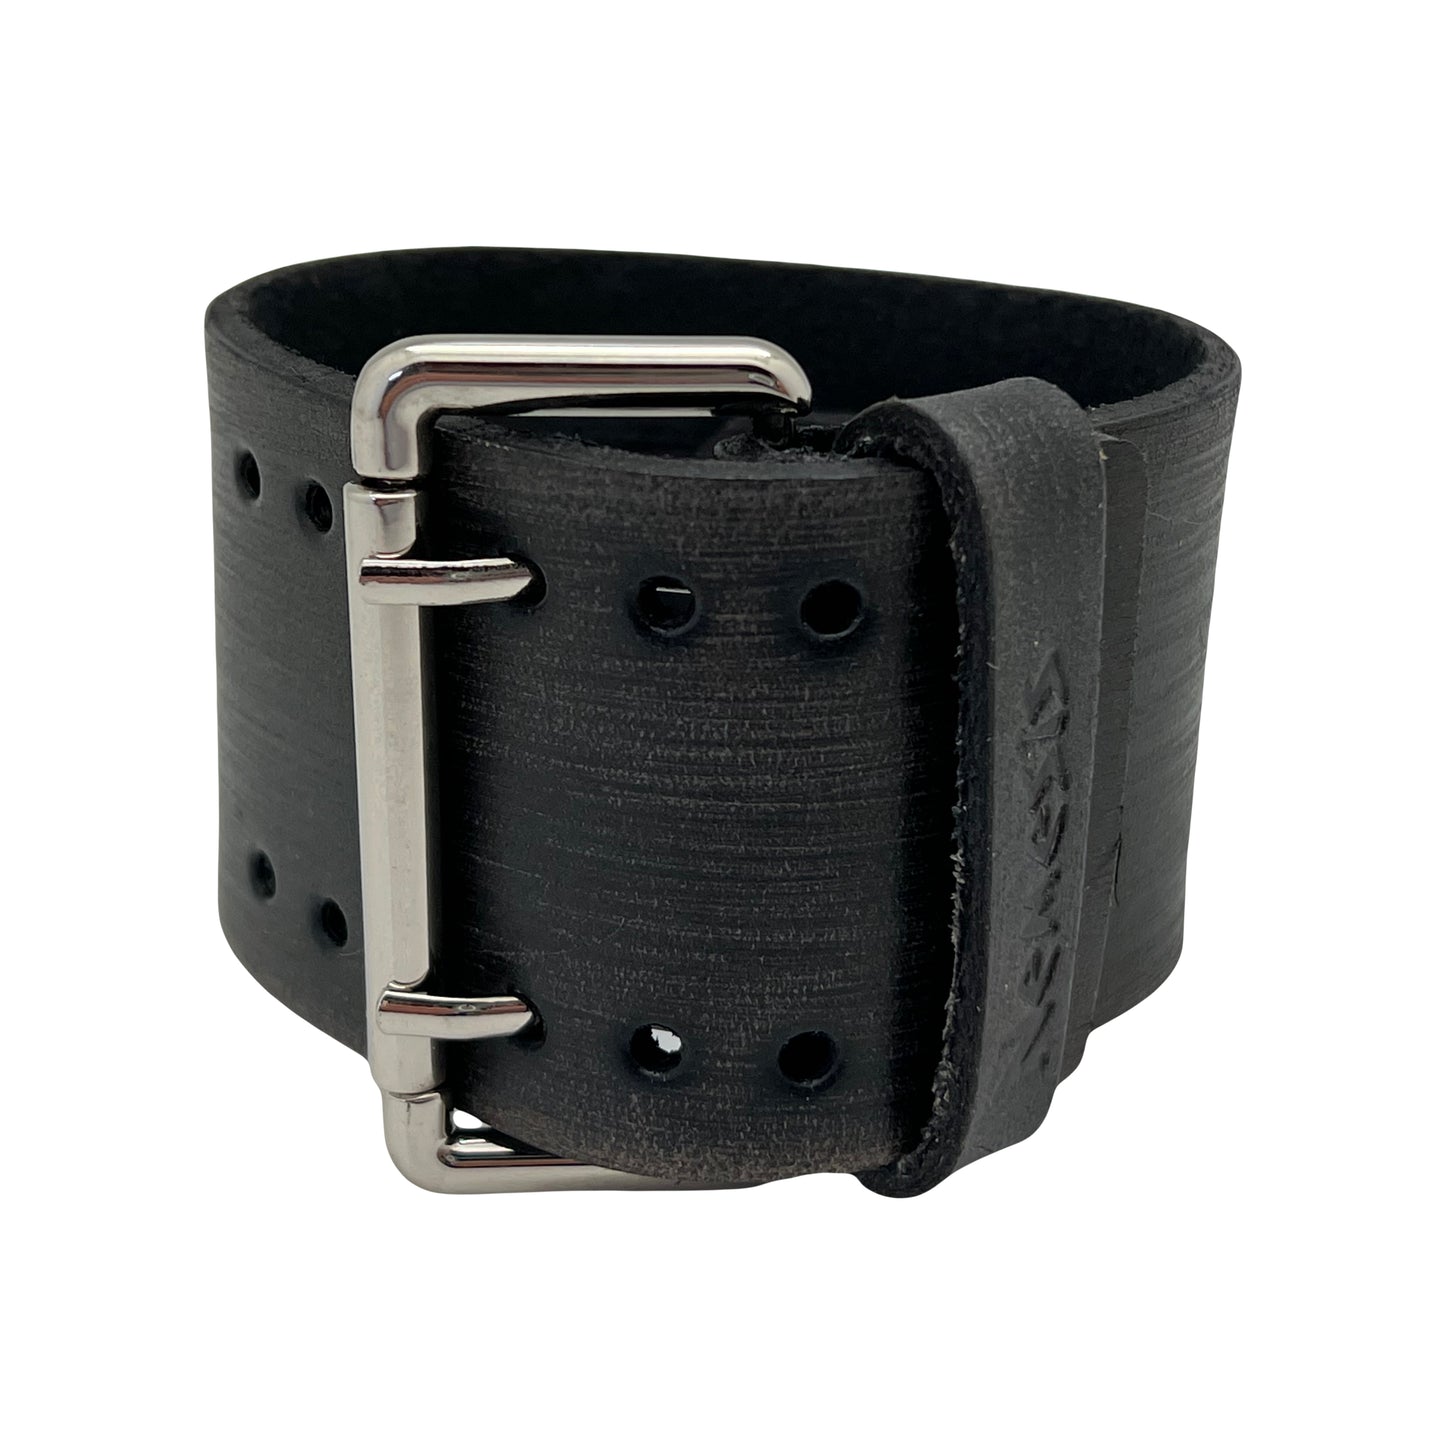 Roman DX Black Watch with Double X Distressed Black Leather Cuff